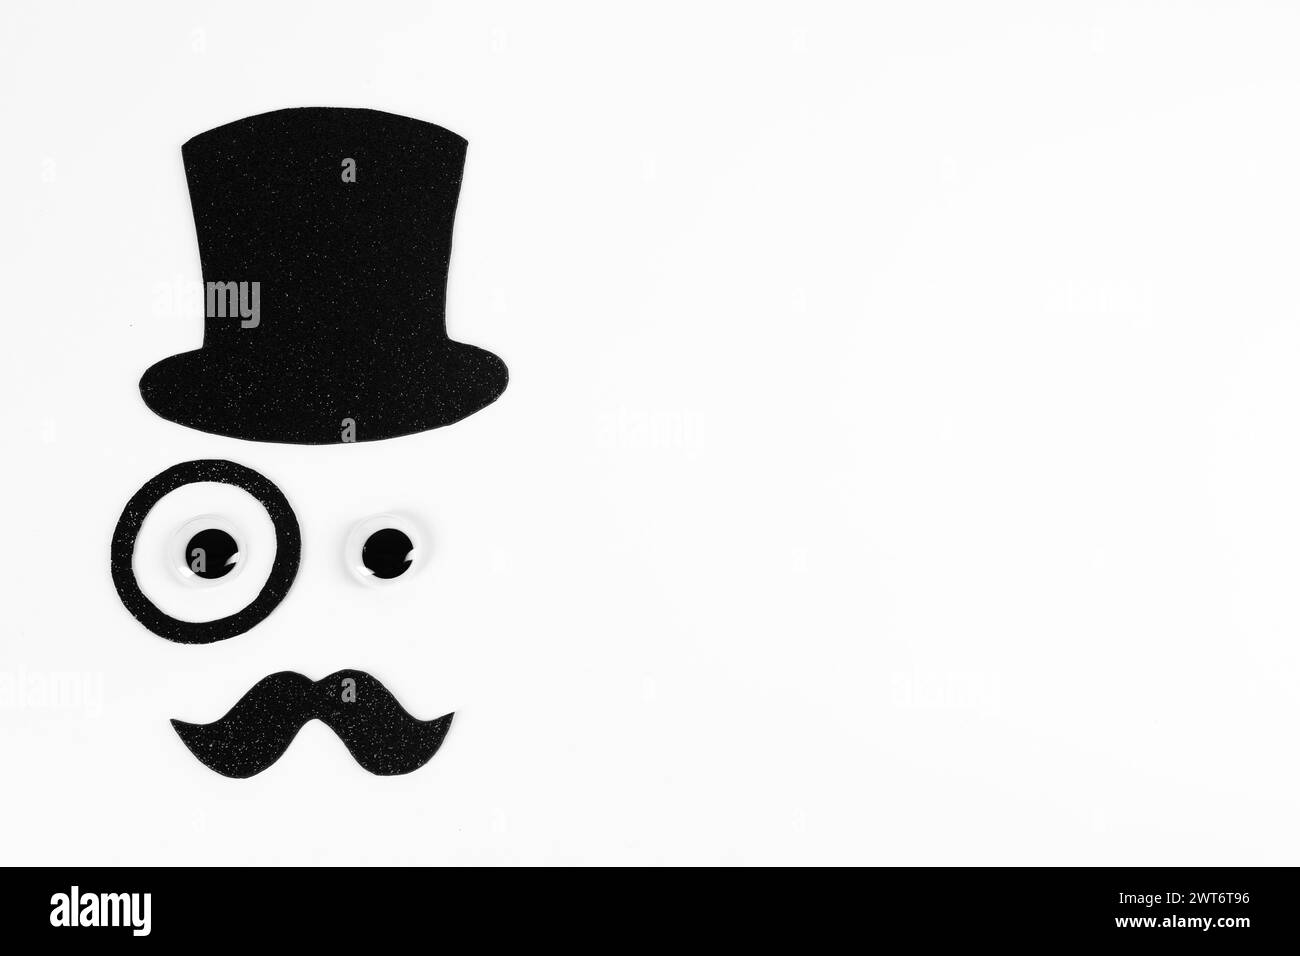 Man's face made of fake mustache, hat, eyes and monocle on white background, top view. Space for text Stock Photo